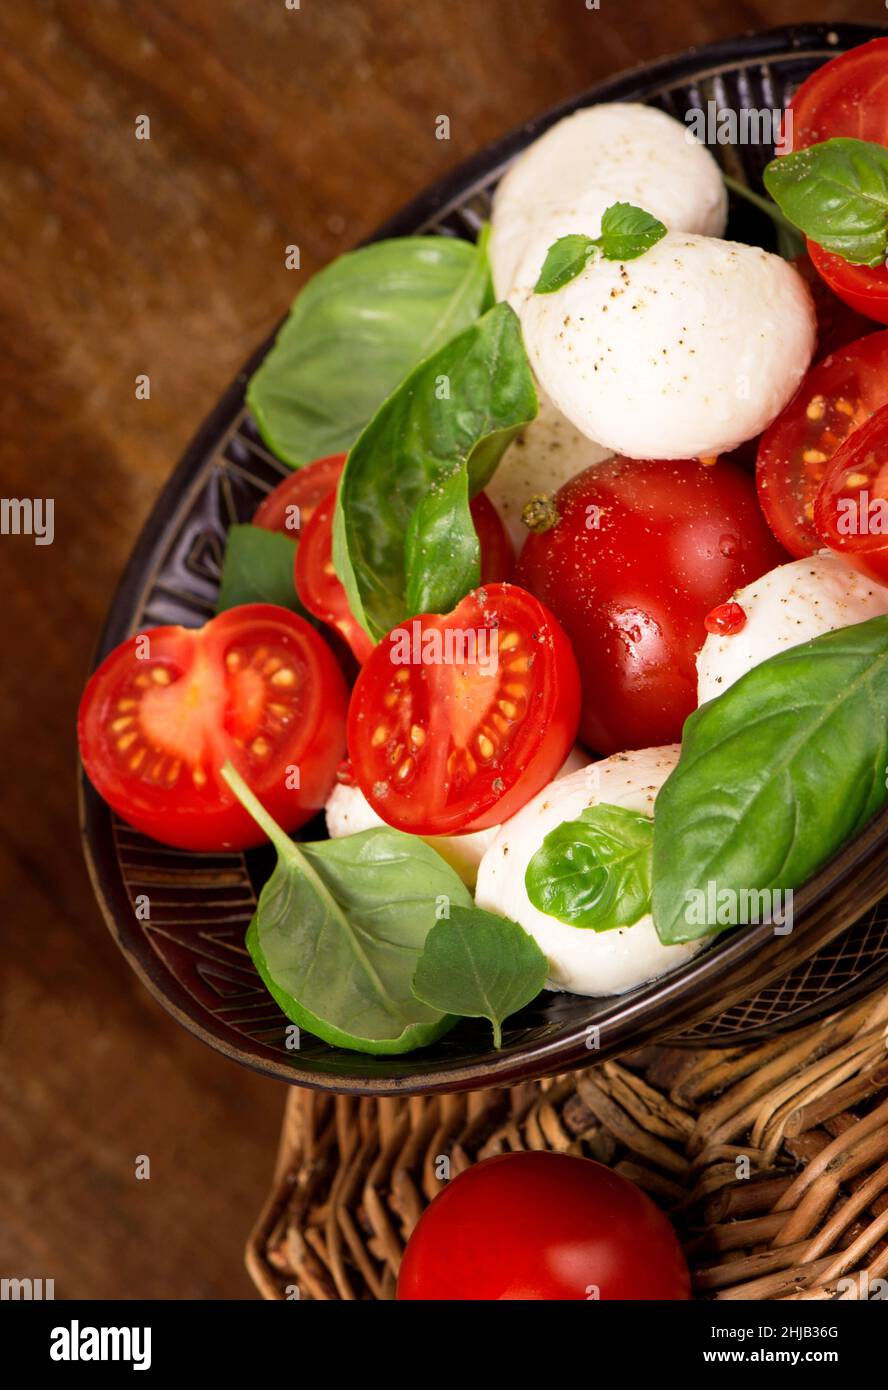 Round camembert cheese with cherry tomatoes and basil on plate. Stock Photo